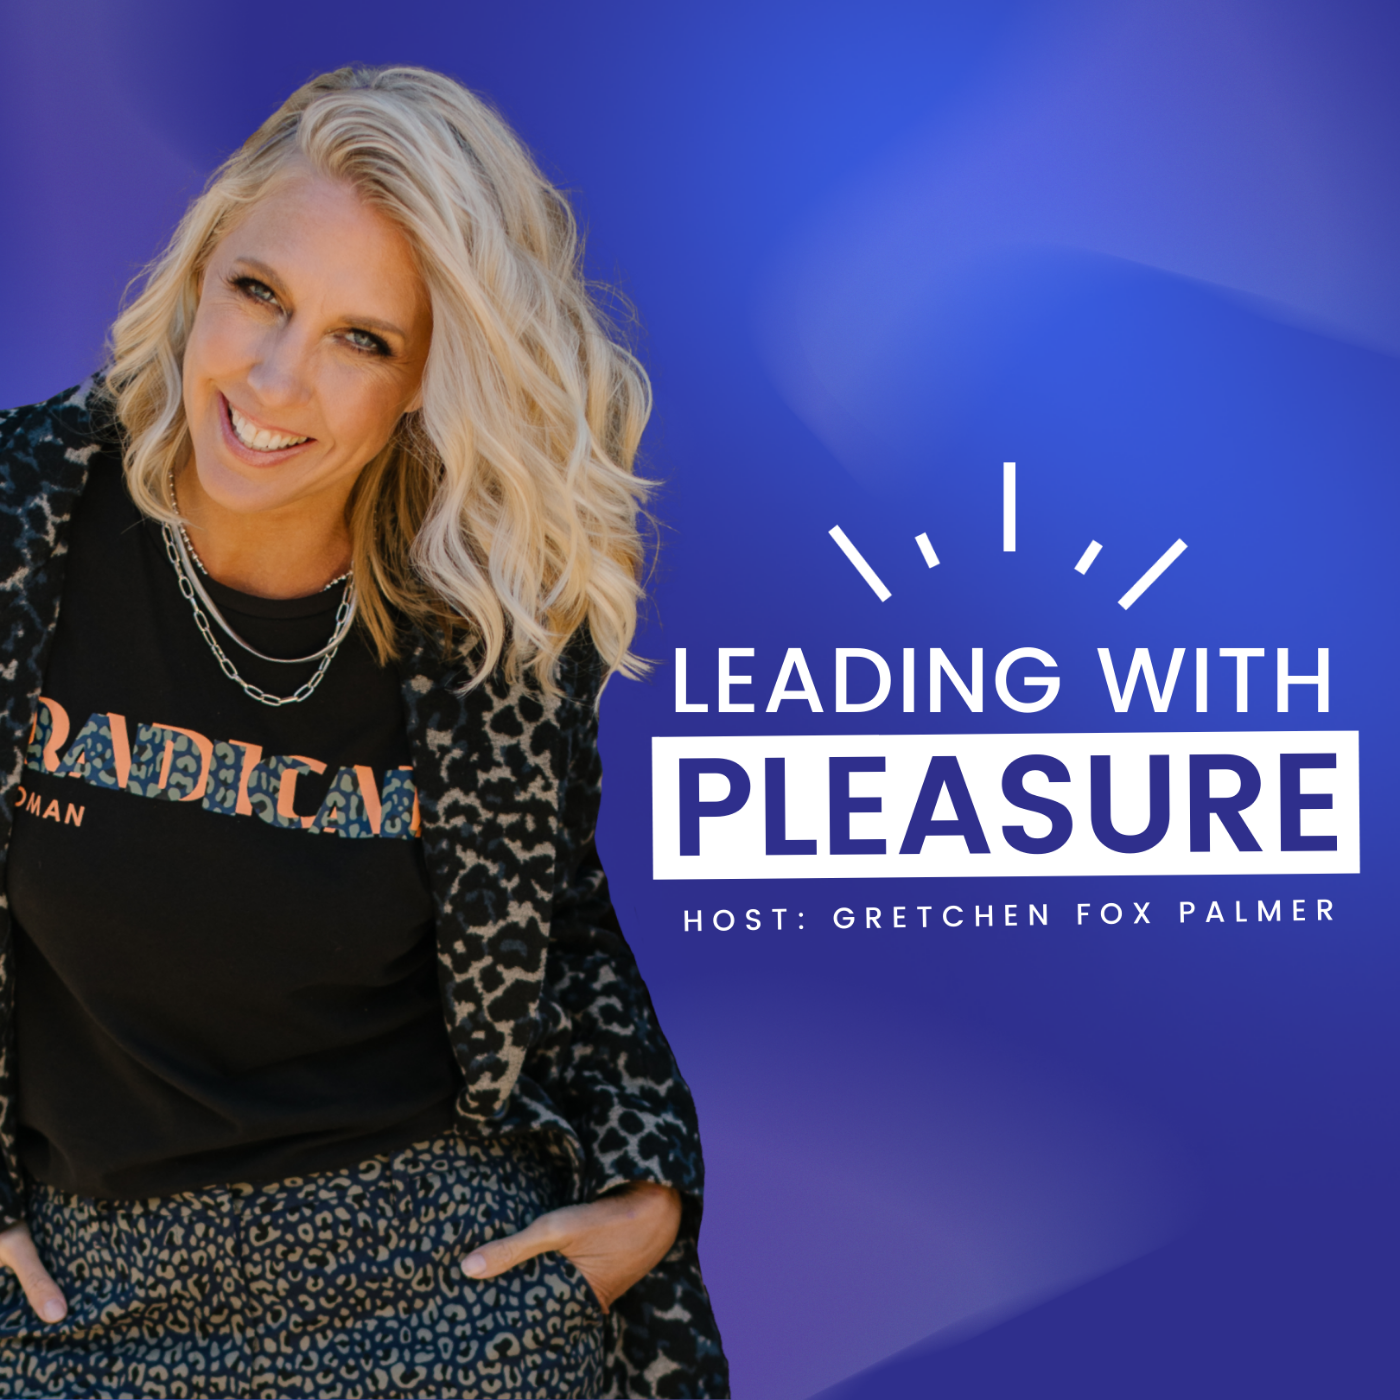 The “Leading with Pleasure” podcast is HERE!